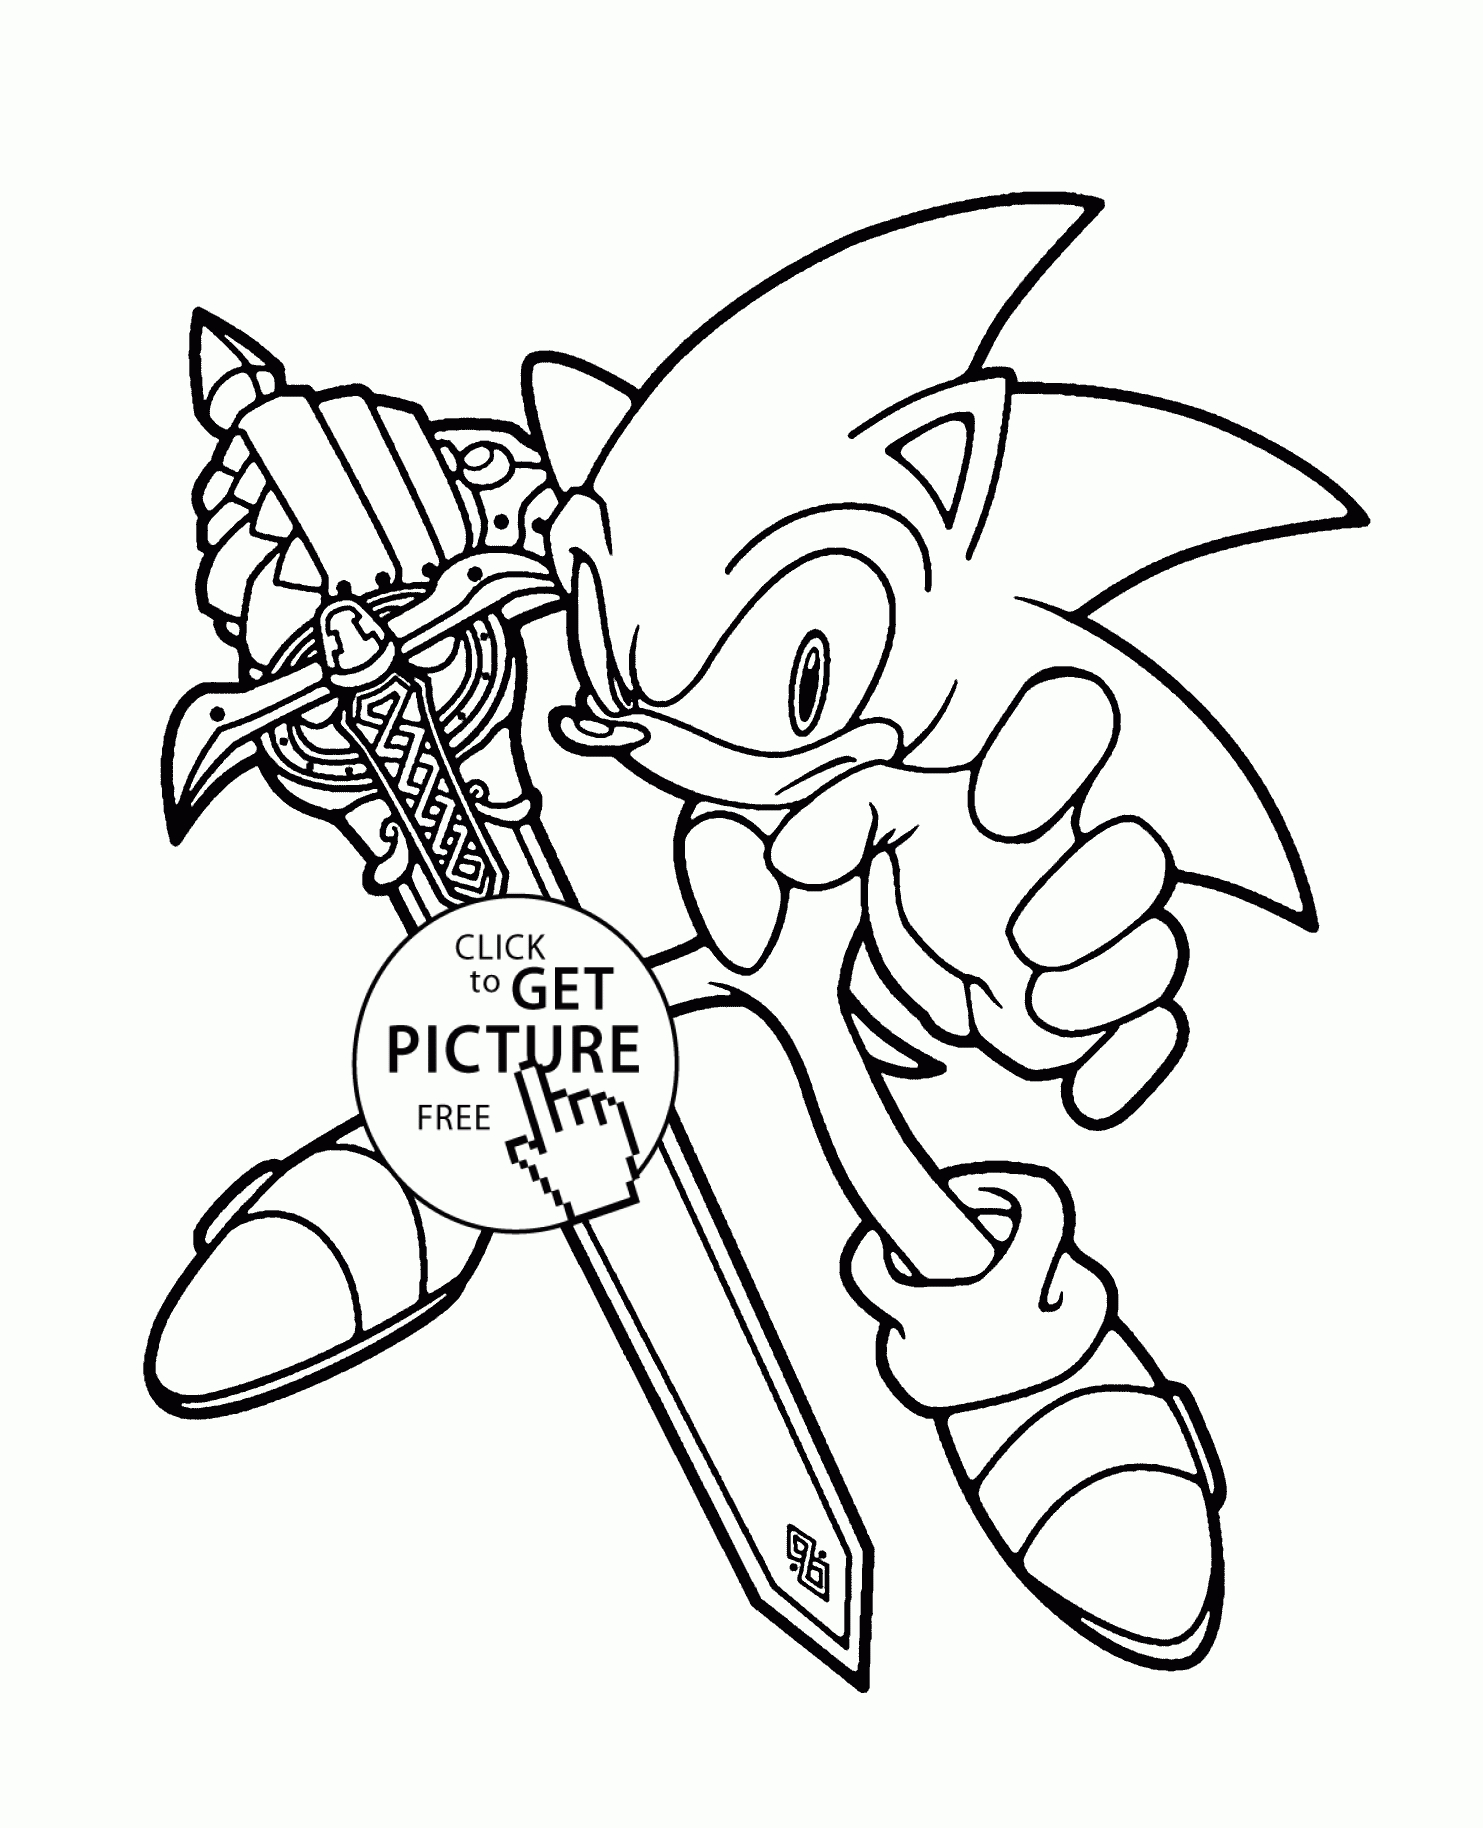 Sonic Coloring Pages For Kids, Printable Free | Coloing-4Kids - Sonic Coloring Pages Free Printable